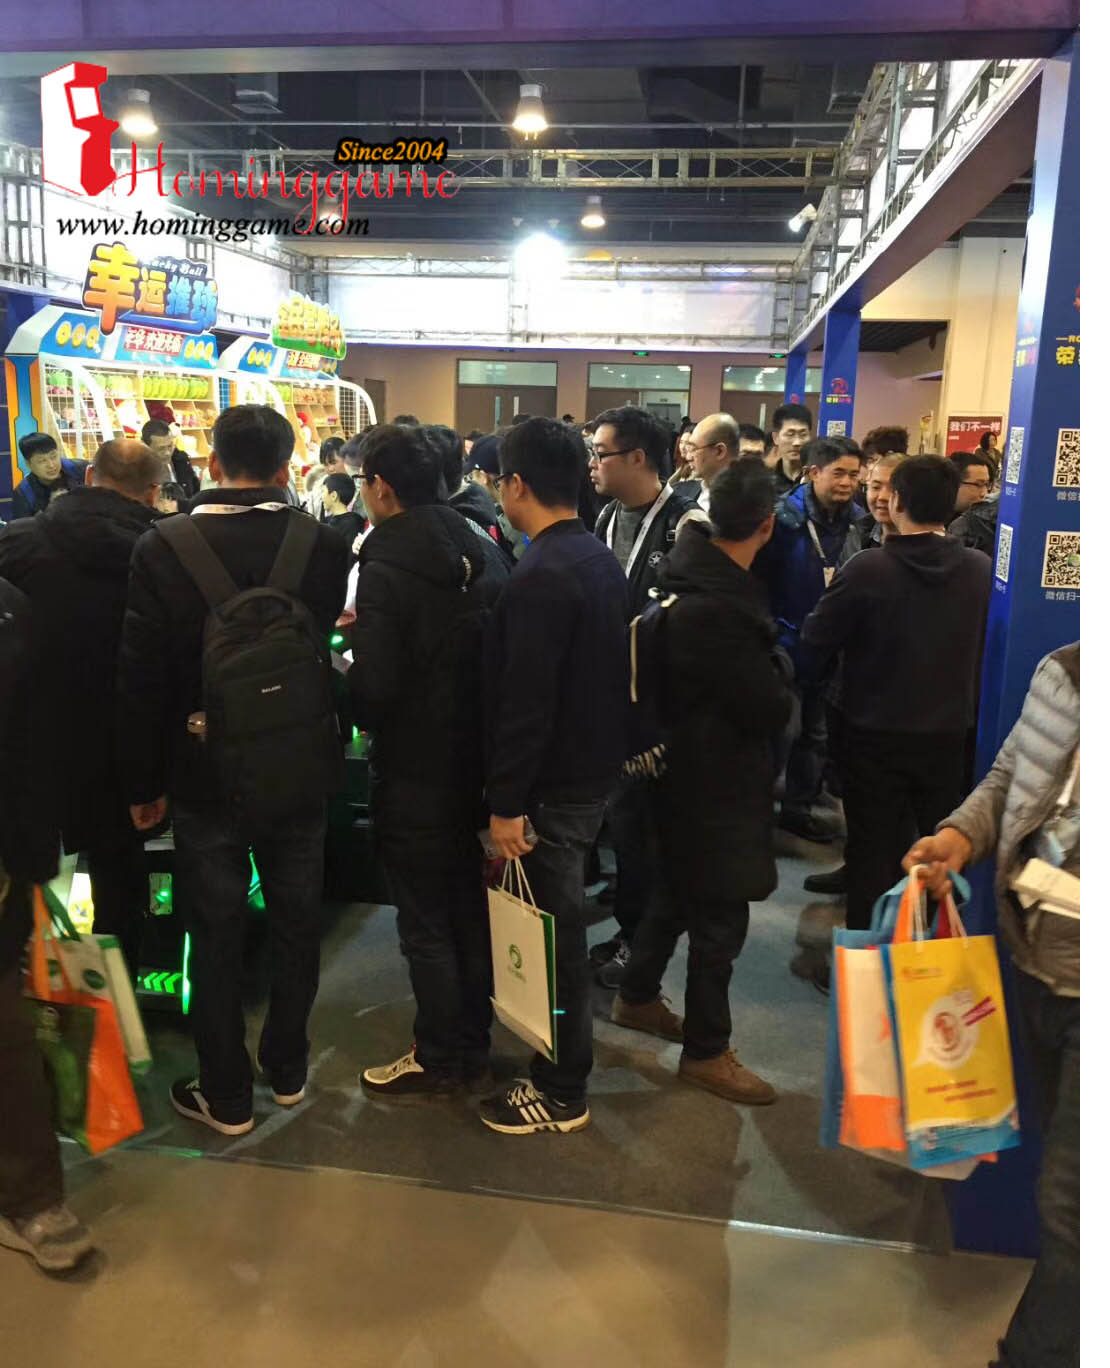 We Are in 2018 CAAPA BeiJing Game Exhibition Show,CAAPA,game show,game exhibition show,game machine,arcade game machine,coin operated game machine,prize game machine,coin pusher,simulator game machine,amusement park game equipment,family entertainment,entertainment game machine,hominggame,homing game